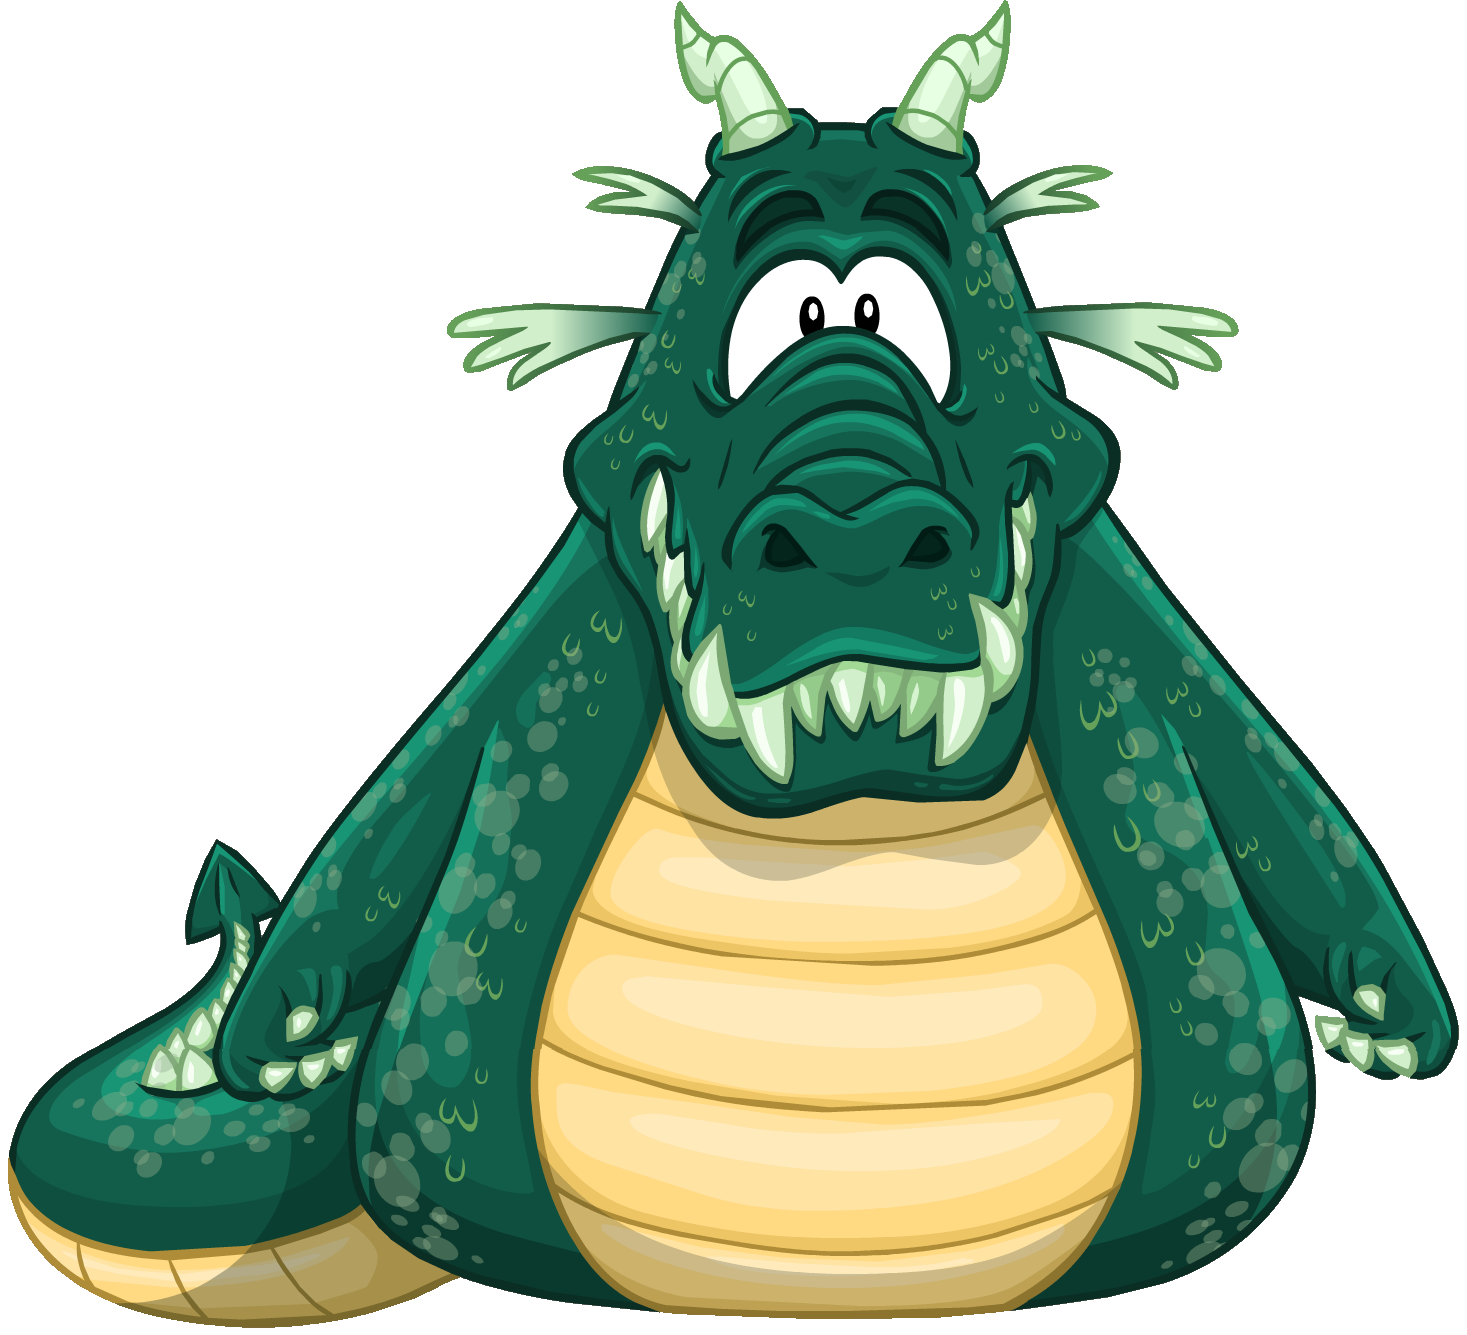 Image - Enchanted Dragon Icon.png - Club Penguin Wiki - The free ...